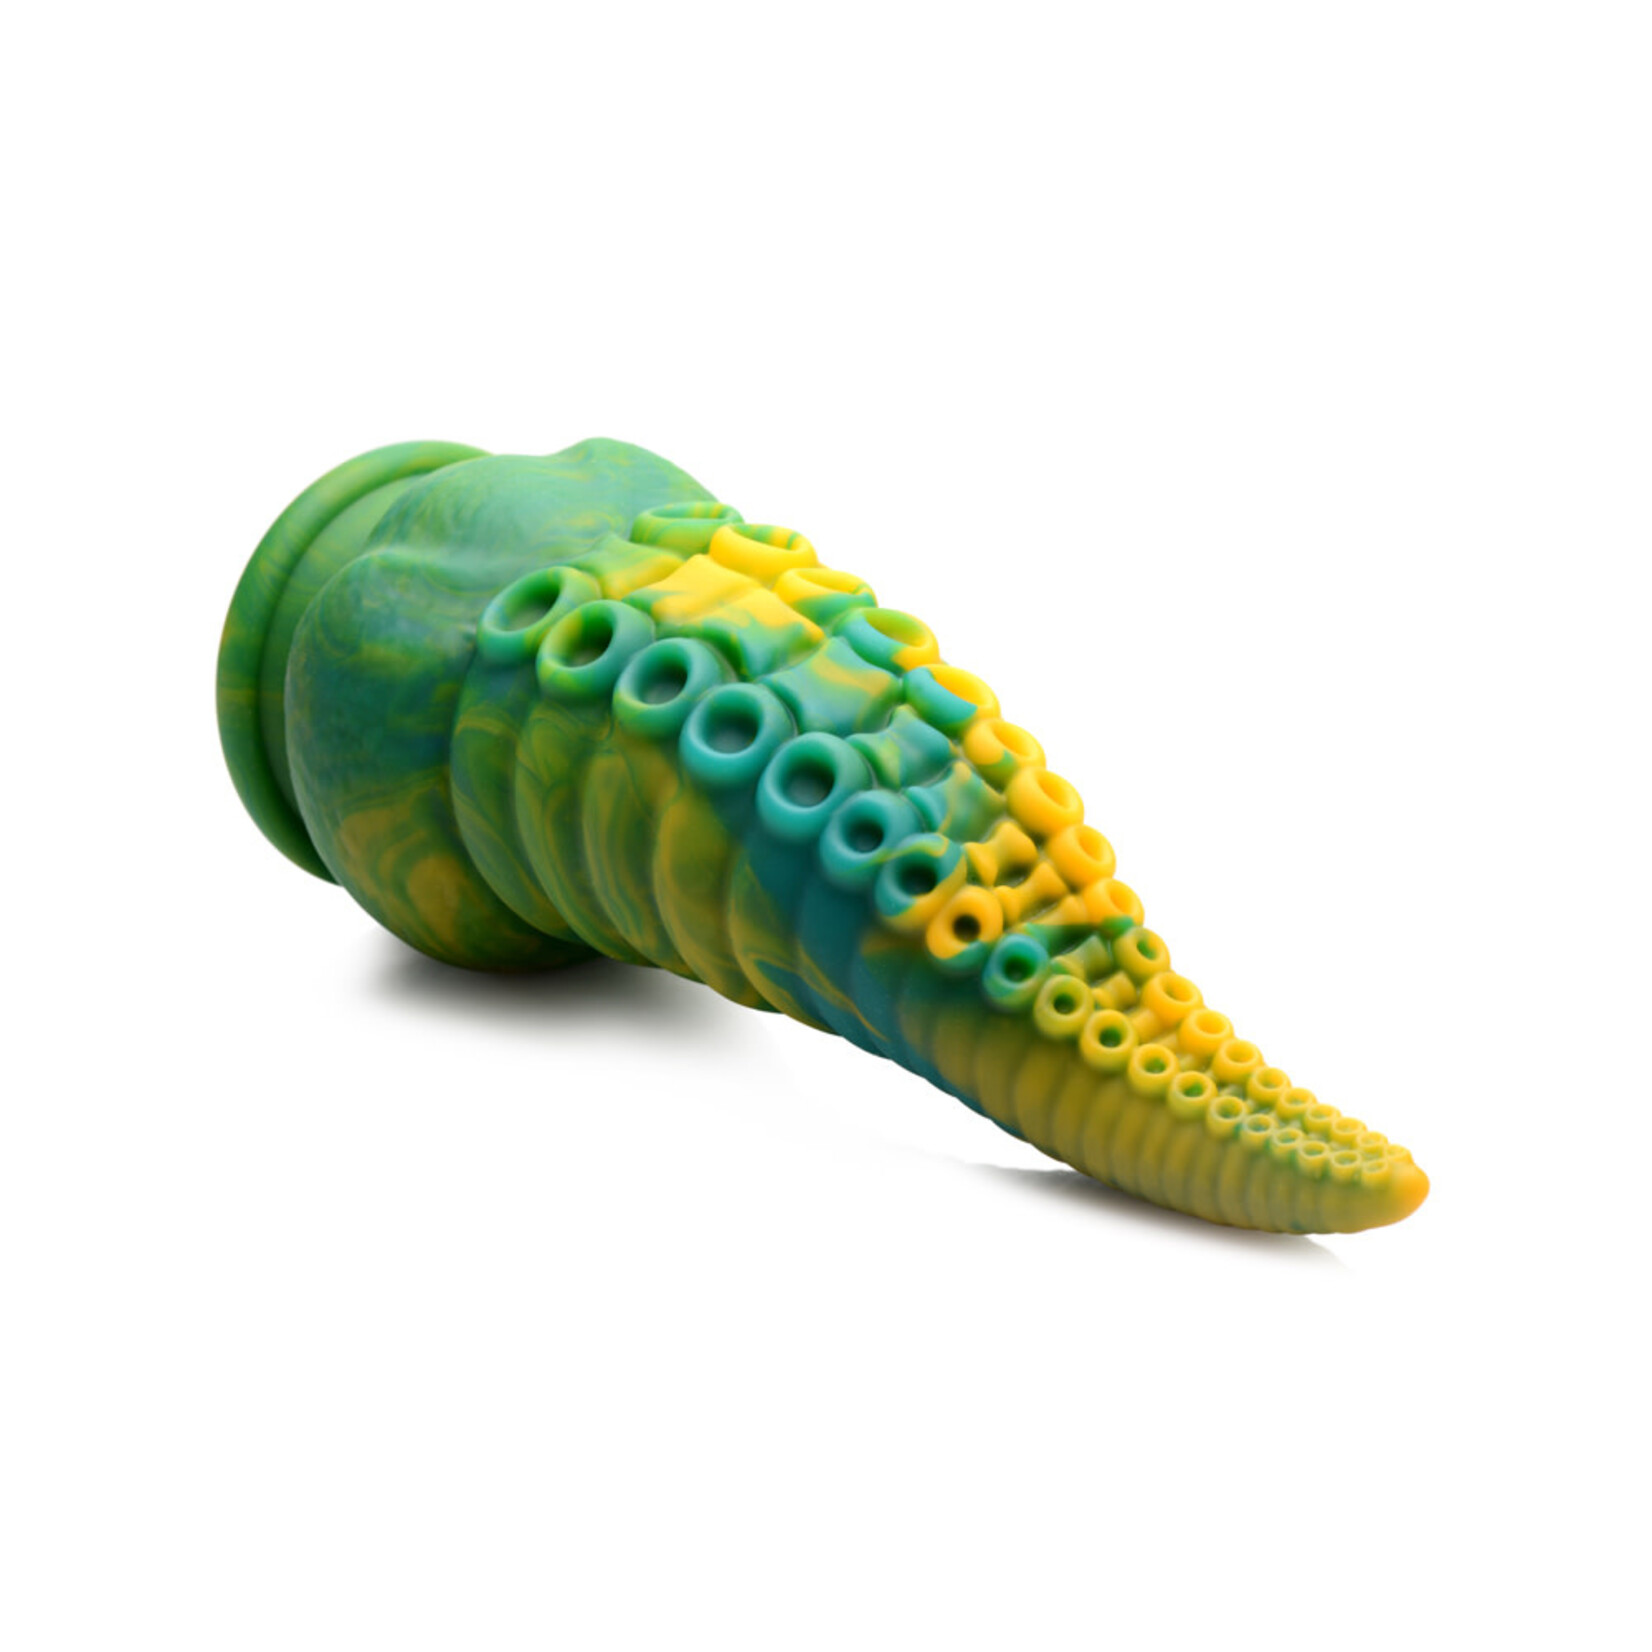 CREATURE COCKS CREATURE COCKS - MONSTROPUS TENTACLED MONSTER SILICONE DILDO